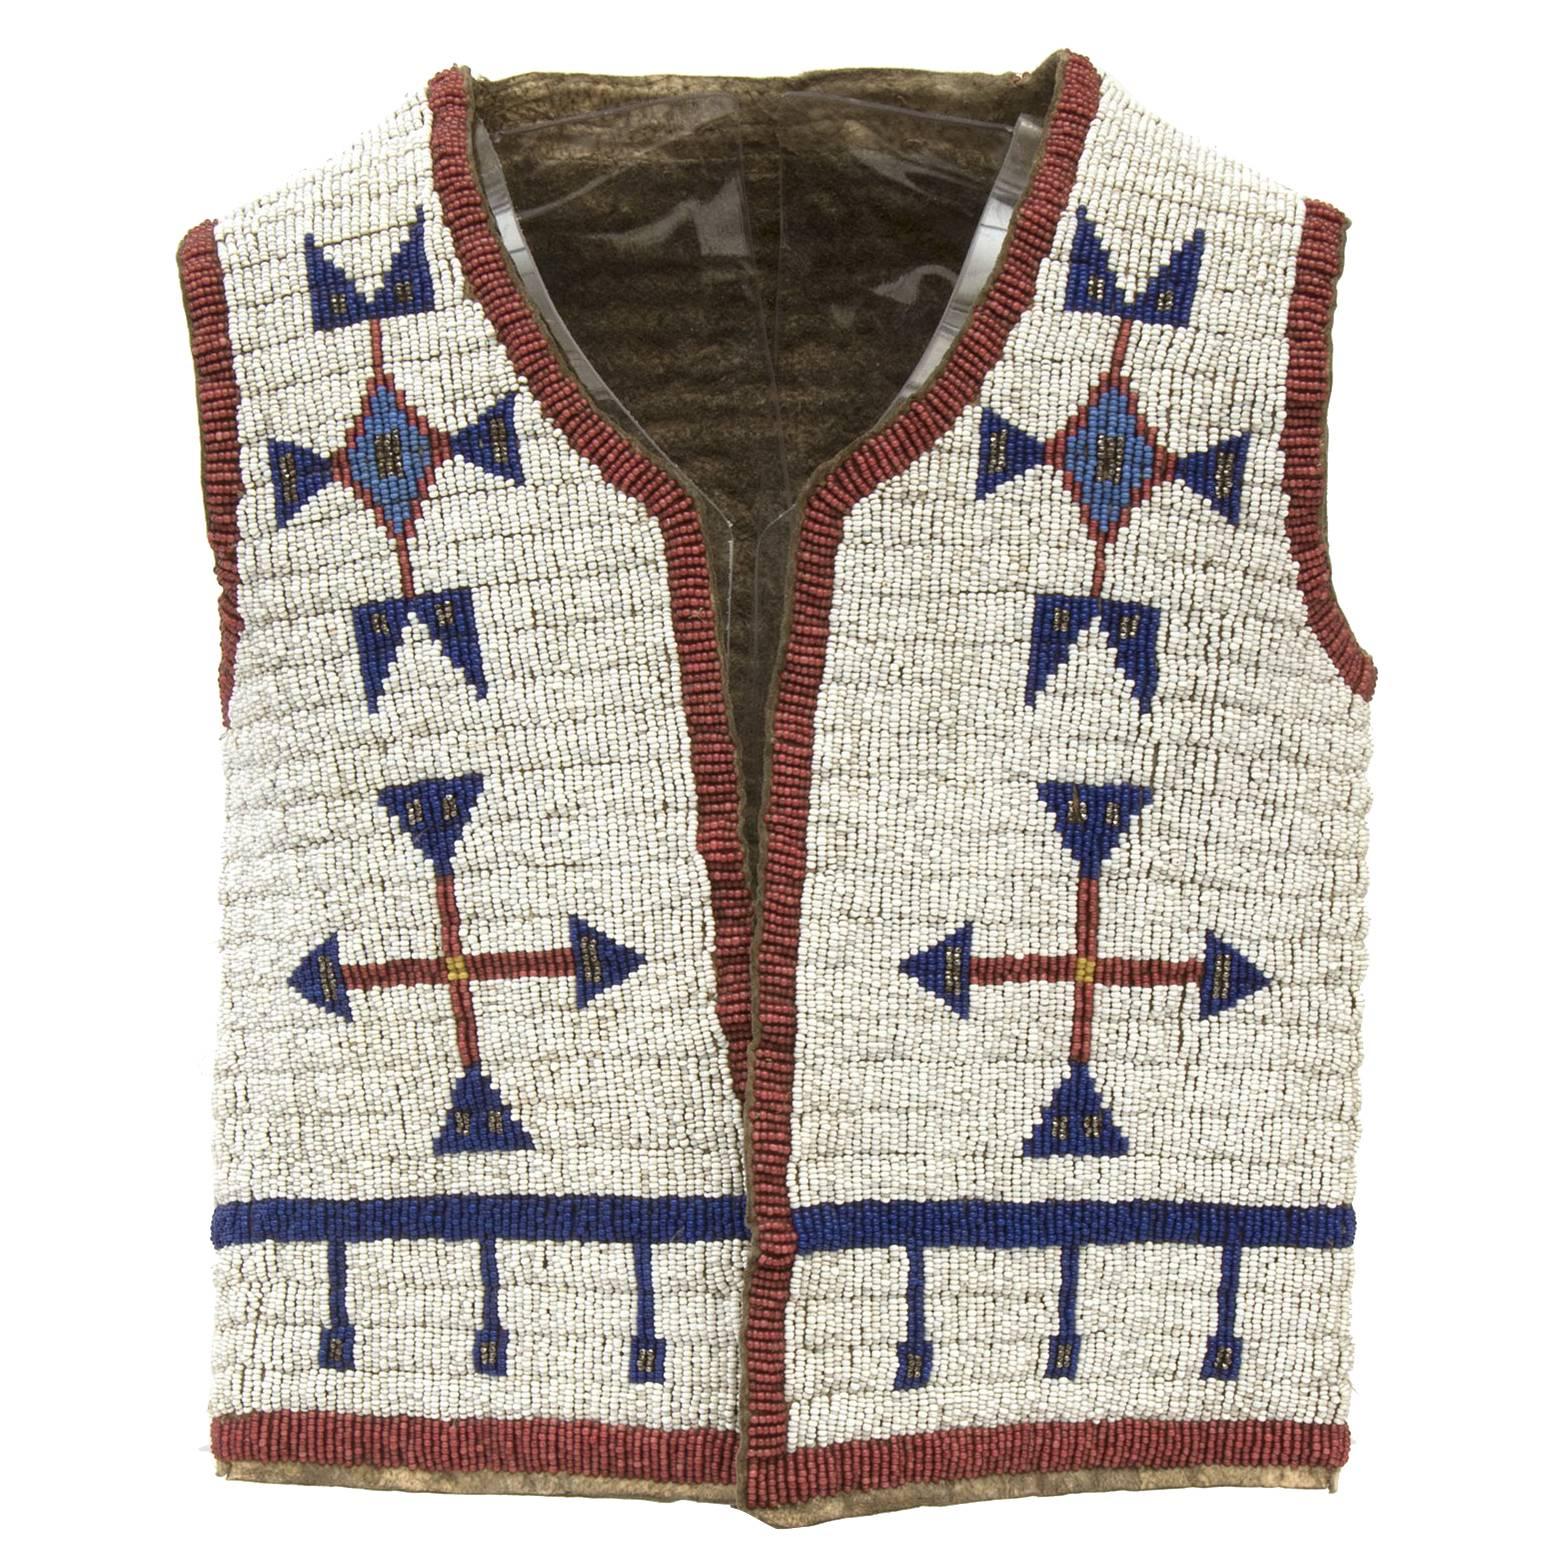 Antique Native American Beaded Child's Vest, Sioux (Plains Indian), 19th Century